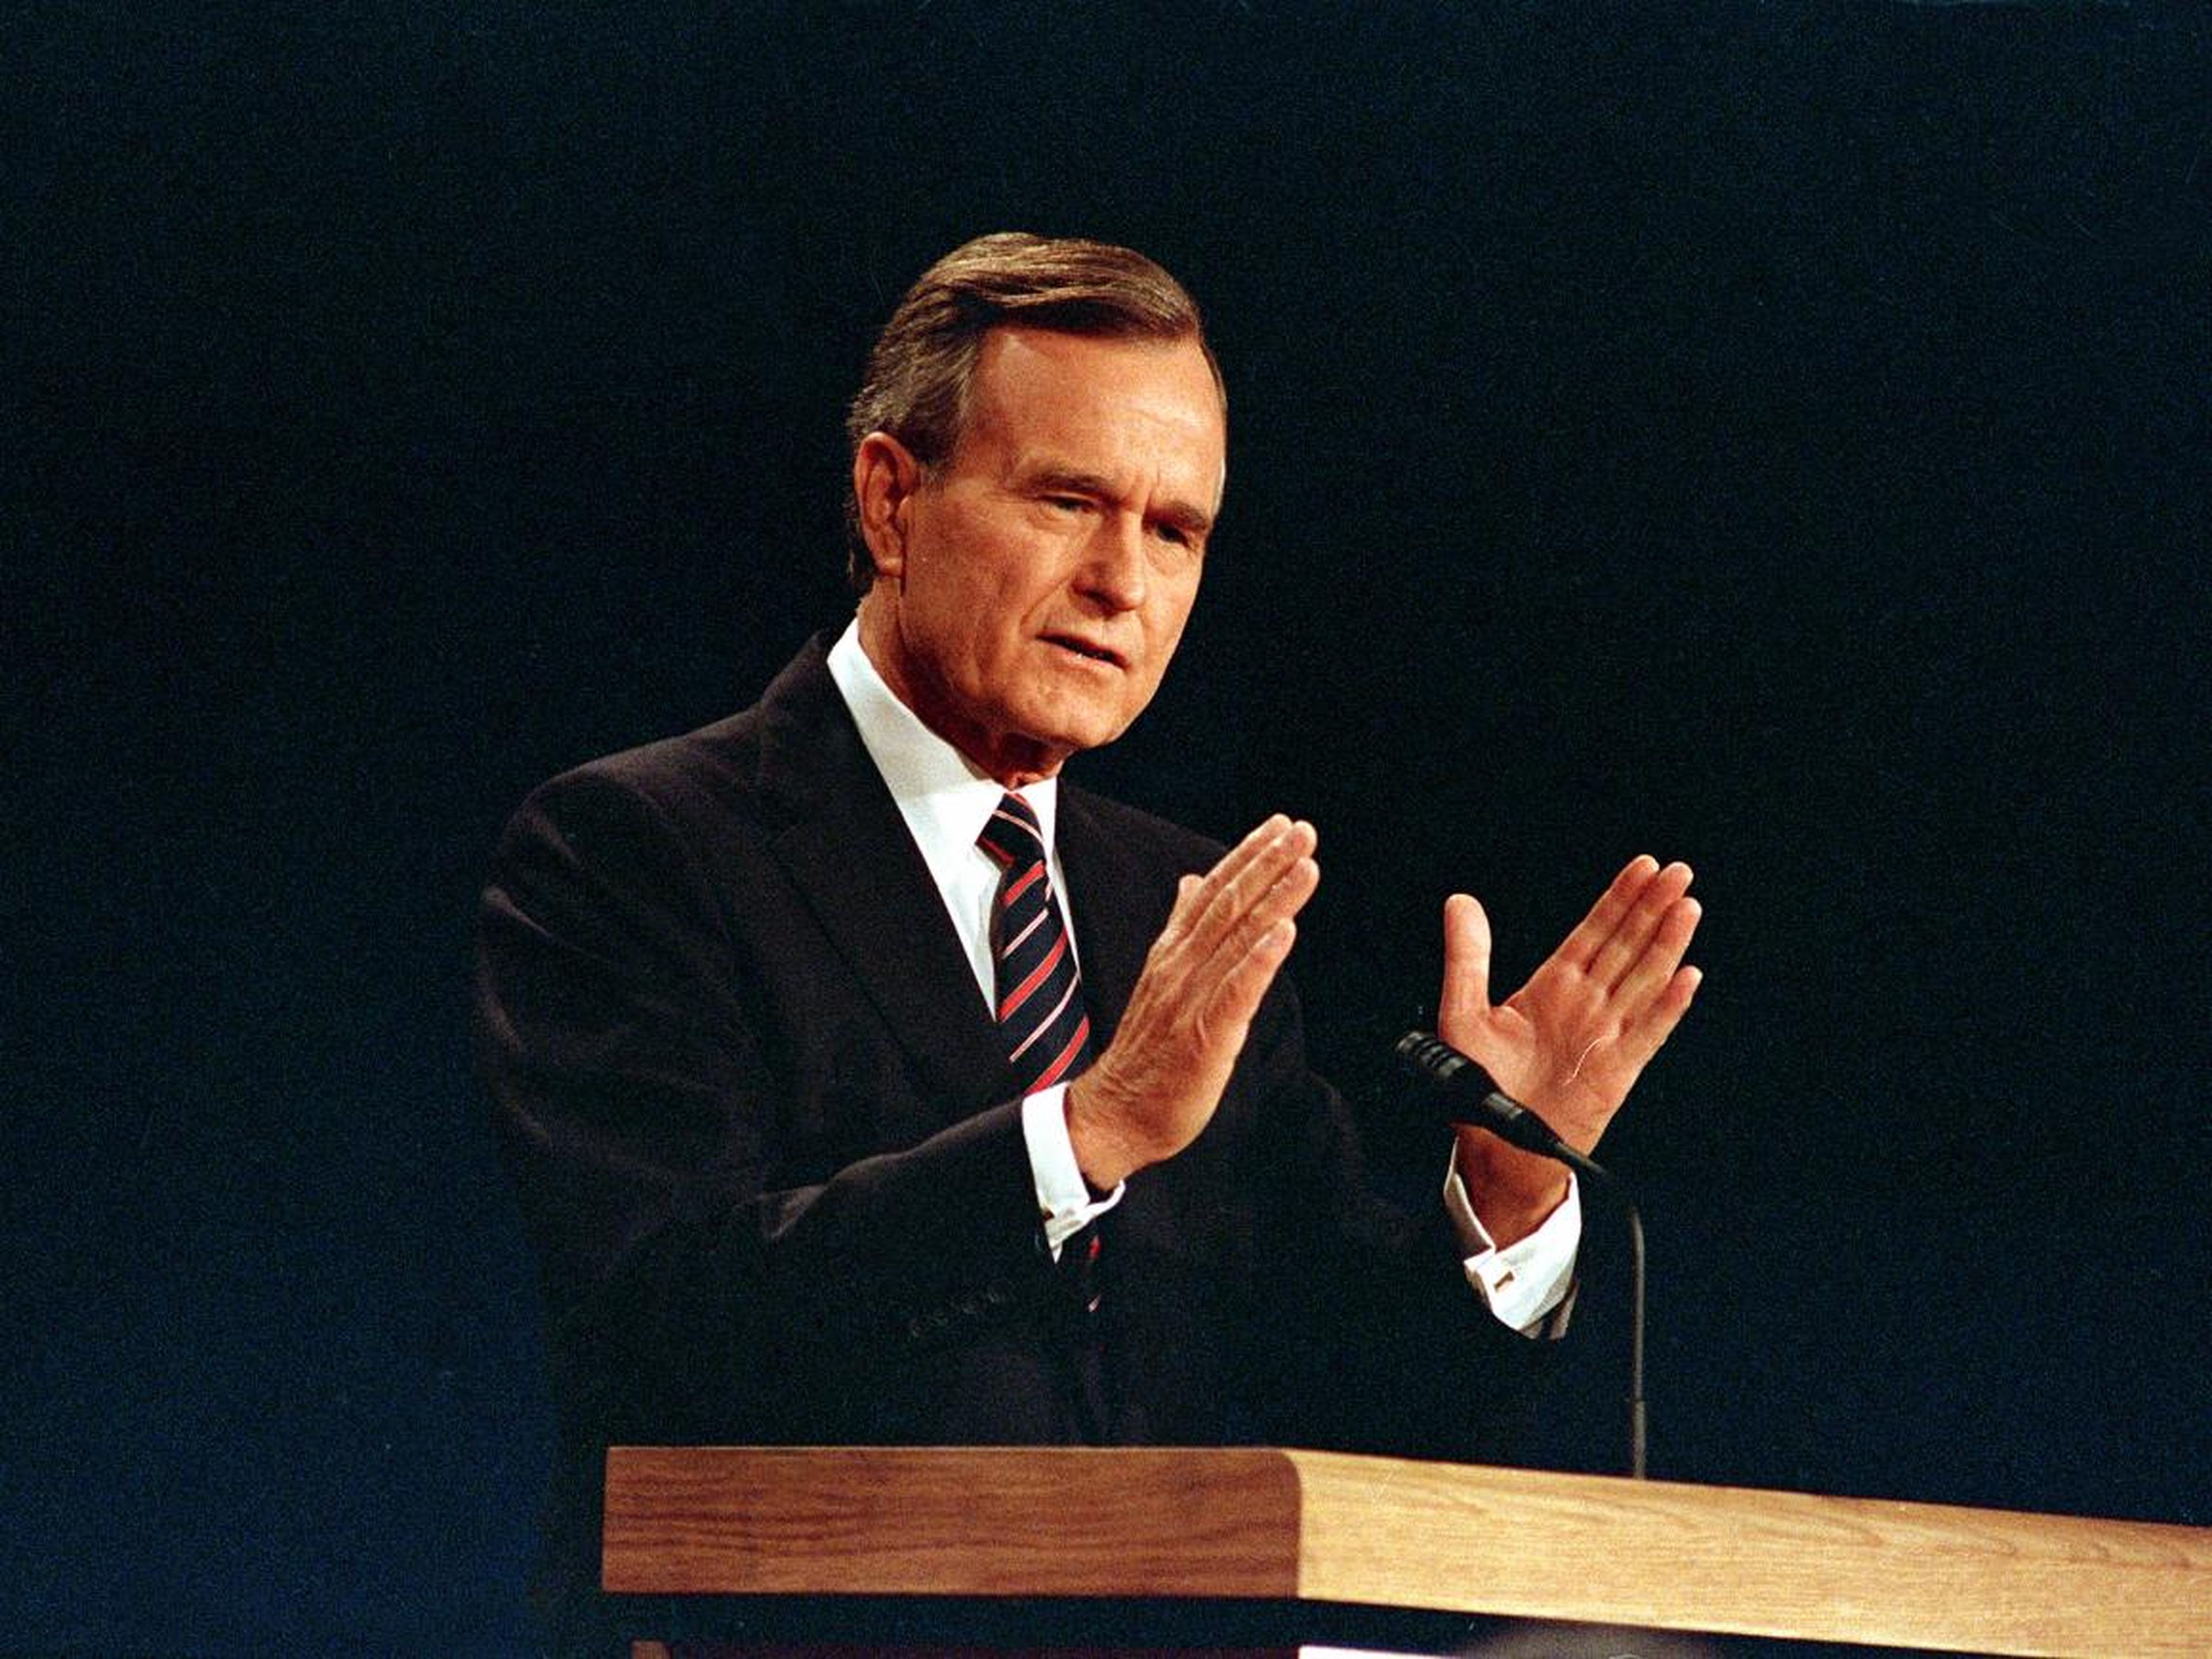 Appearing without his trademark glasses, then-Vice President George H.W. Bush answered a question at the second presidential debate in October 1988.